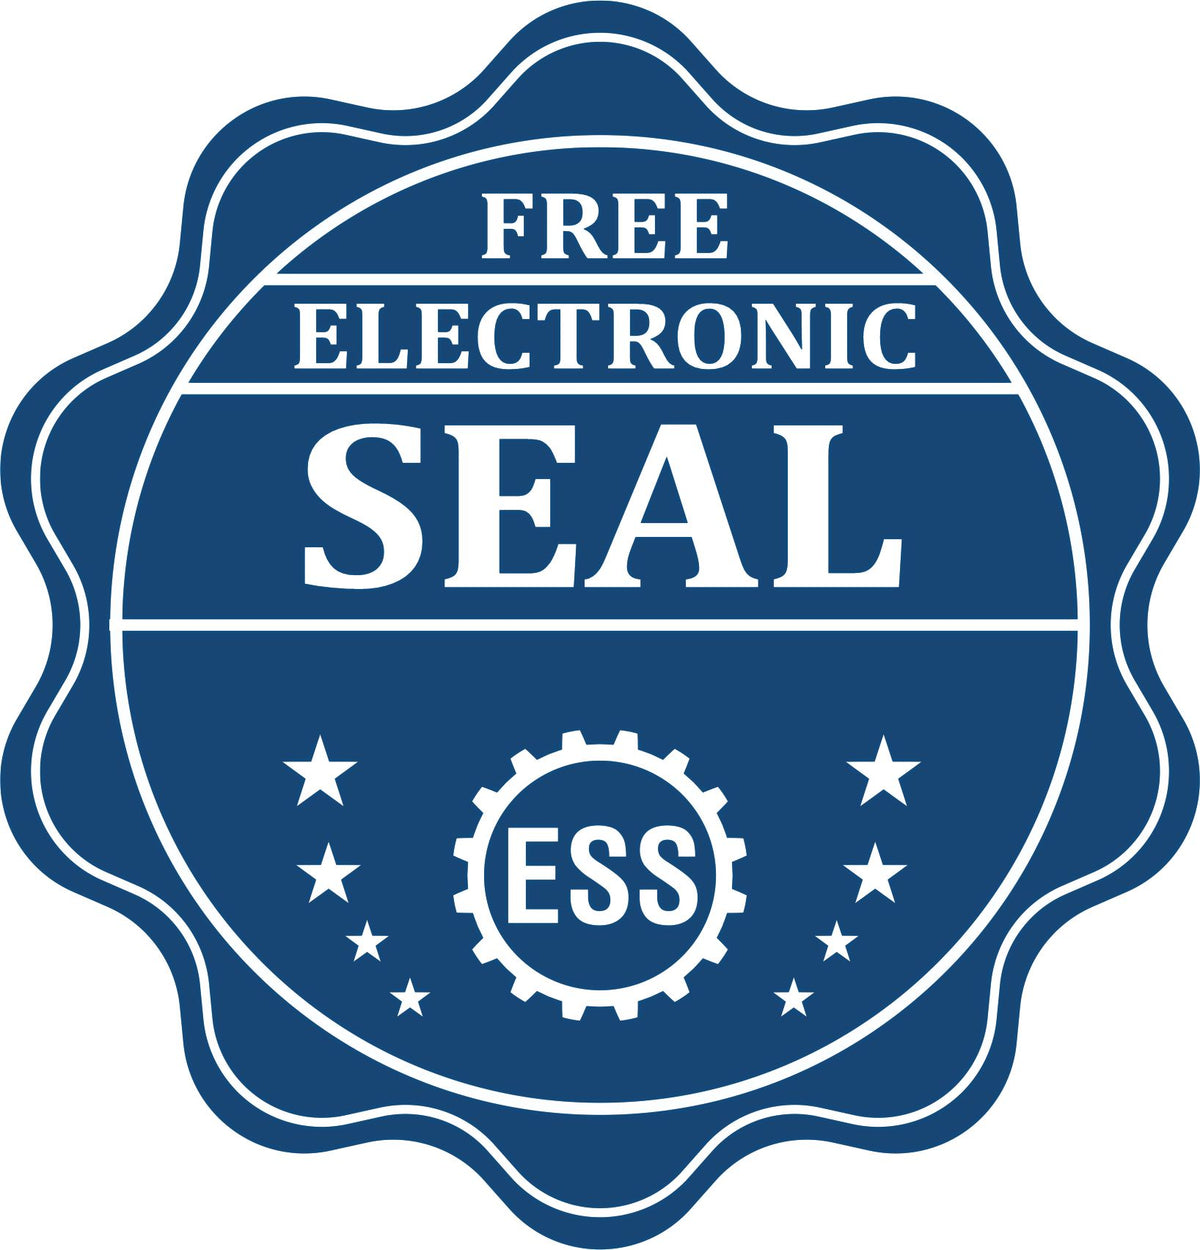 A badge showing a free electronic seal for the Gift Nebraska Architect Seal with stars and the ESS gear on the emblem.